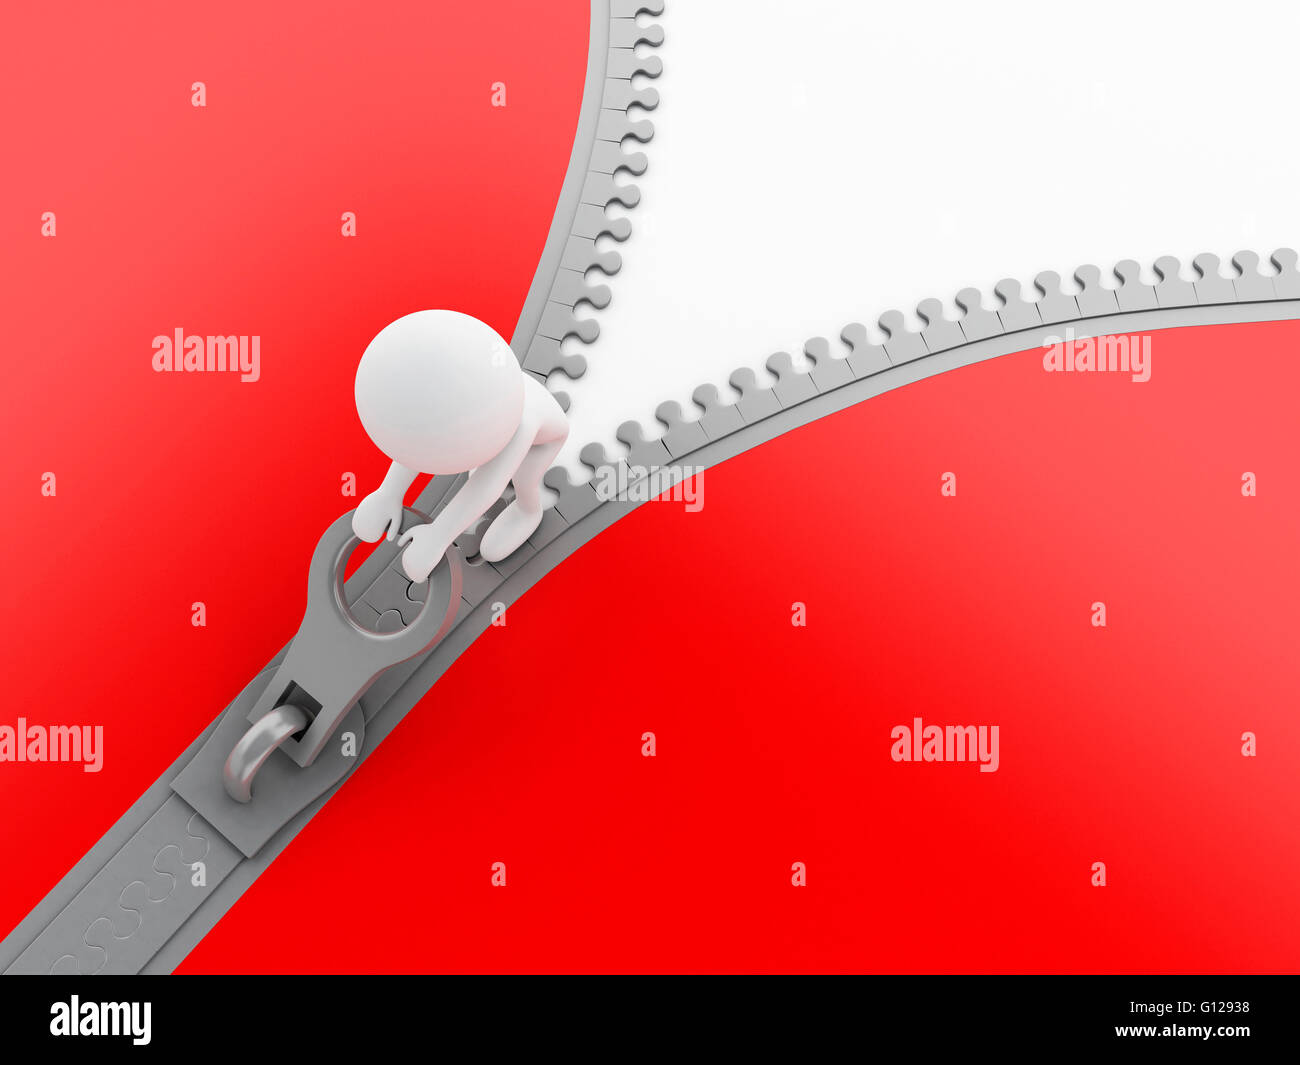 3d renderer image. White people closing a zipper on red background. Stock Photo